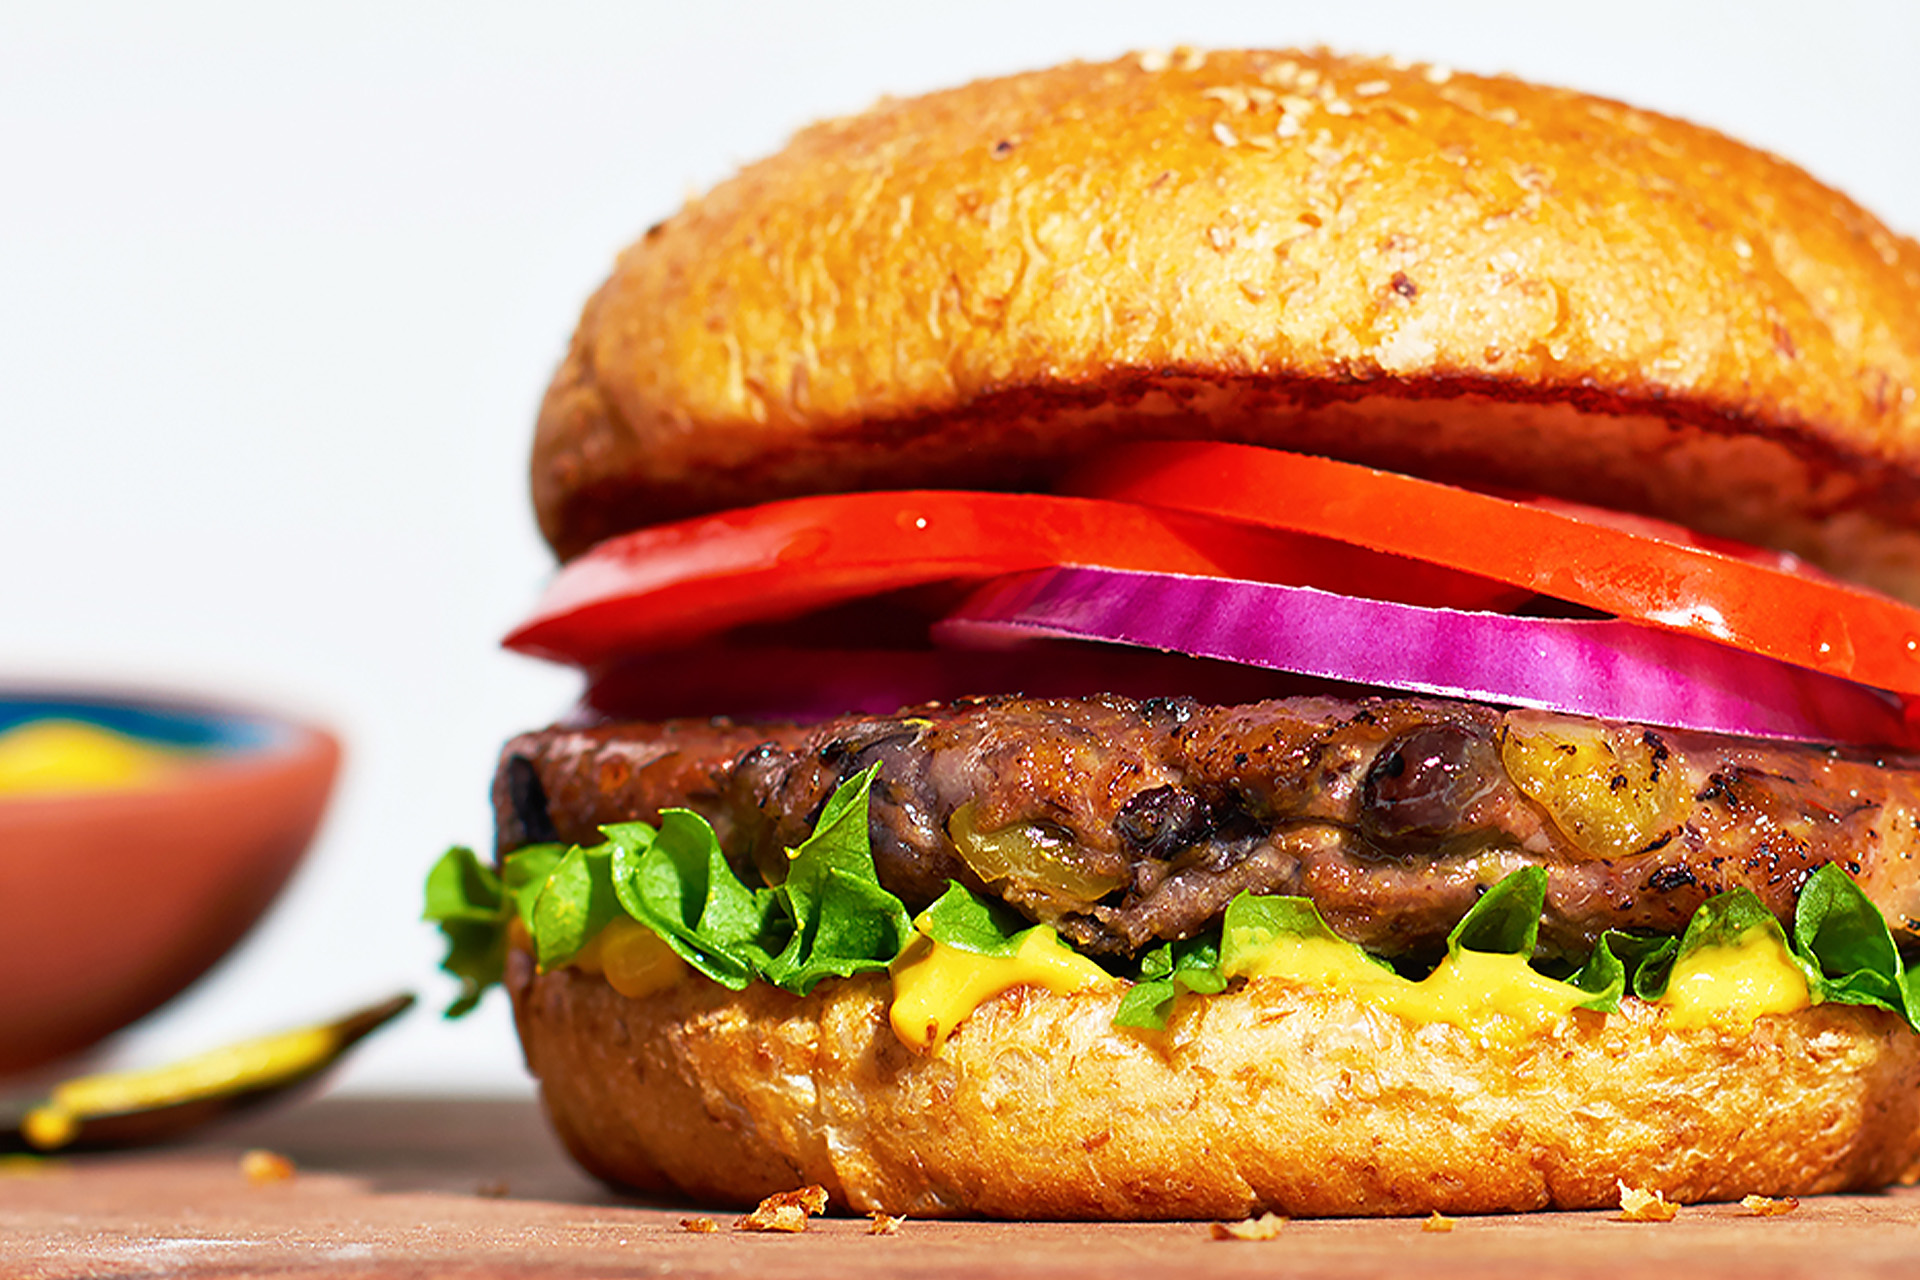 Black bean burger on bun with lettuce, tomato and onion